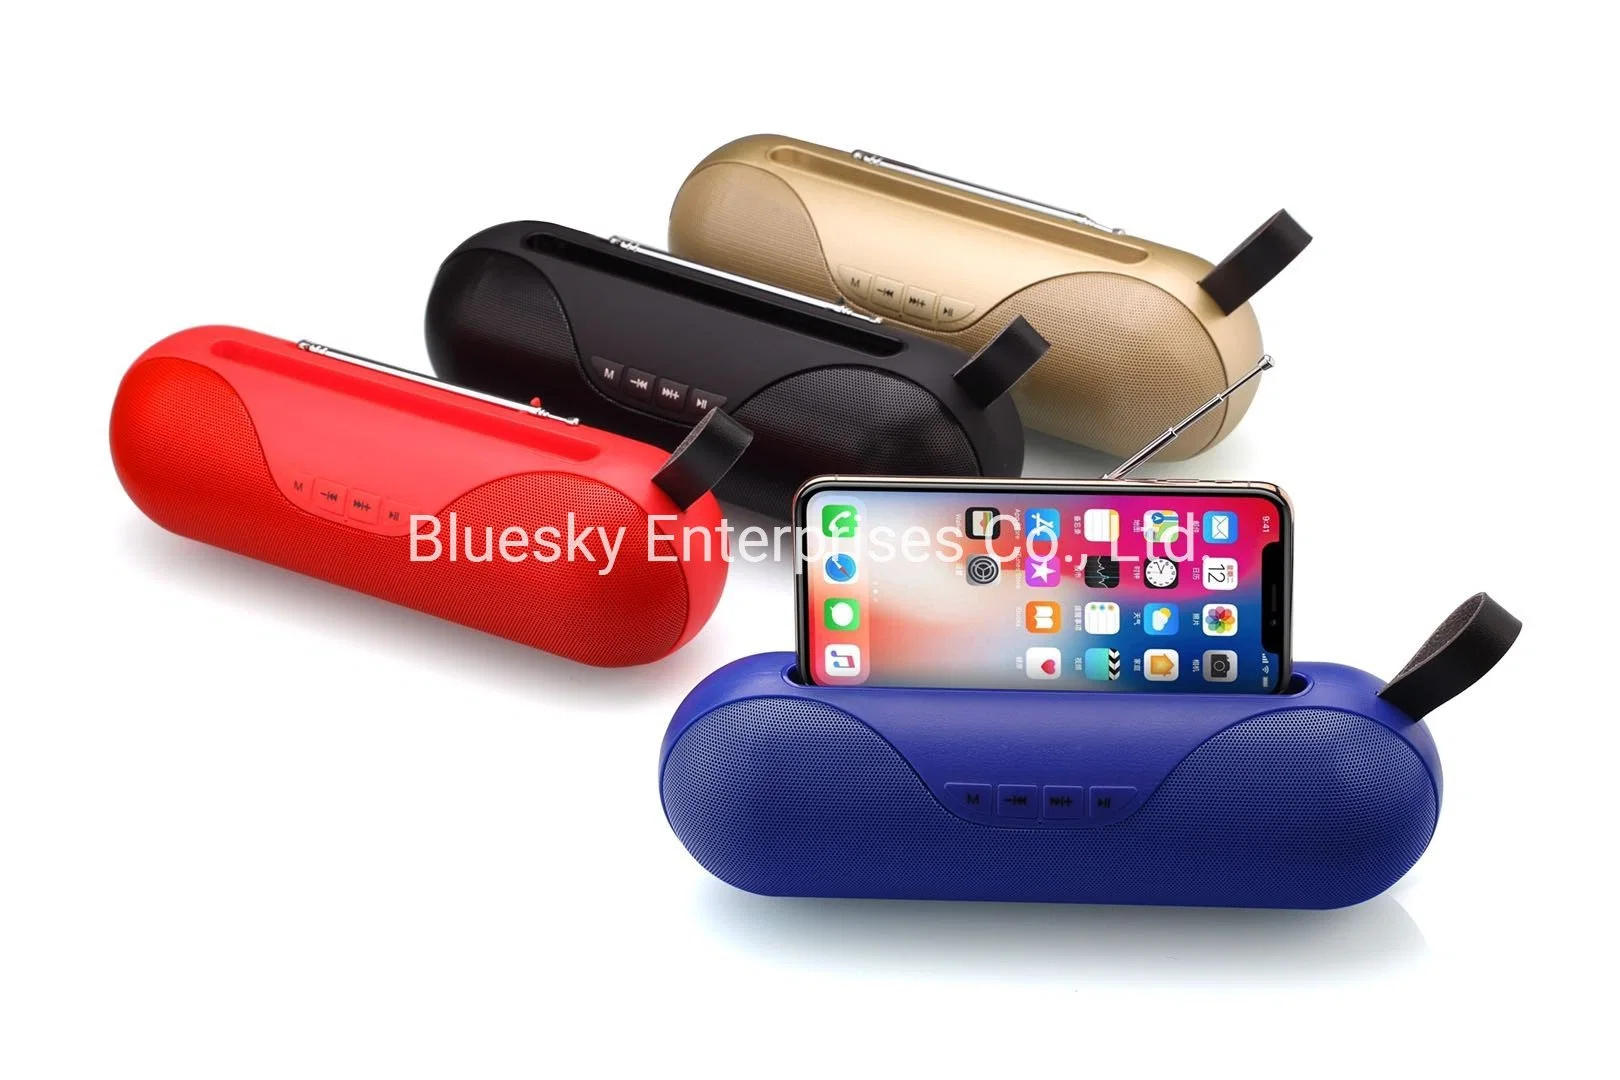 Tw E16 Bluetooth Wireless Speaker with Mobile Phone Holder, Speaker Support USB, TF Card, FM Radio, Aux Line in Function